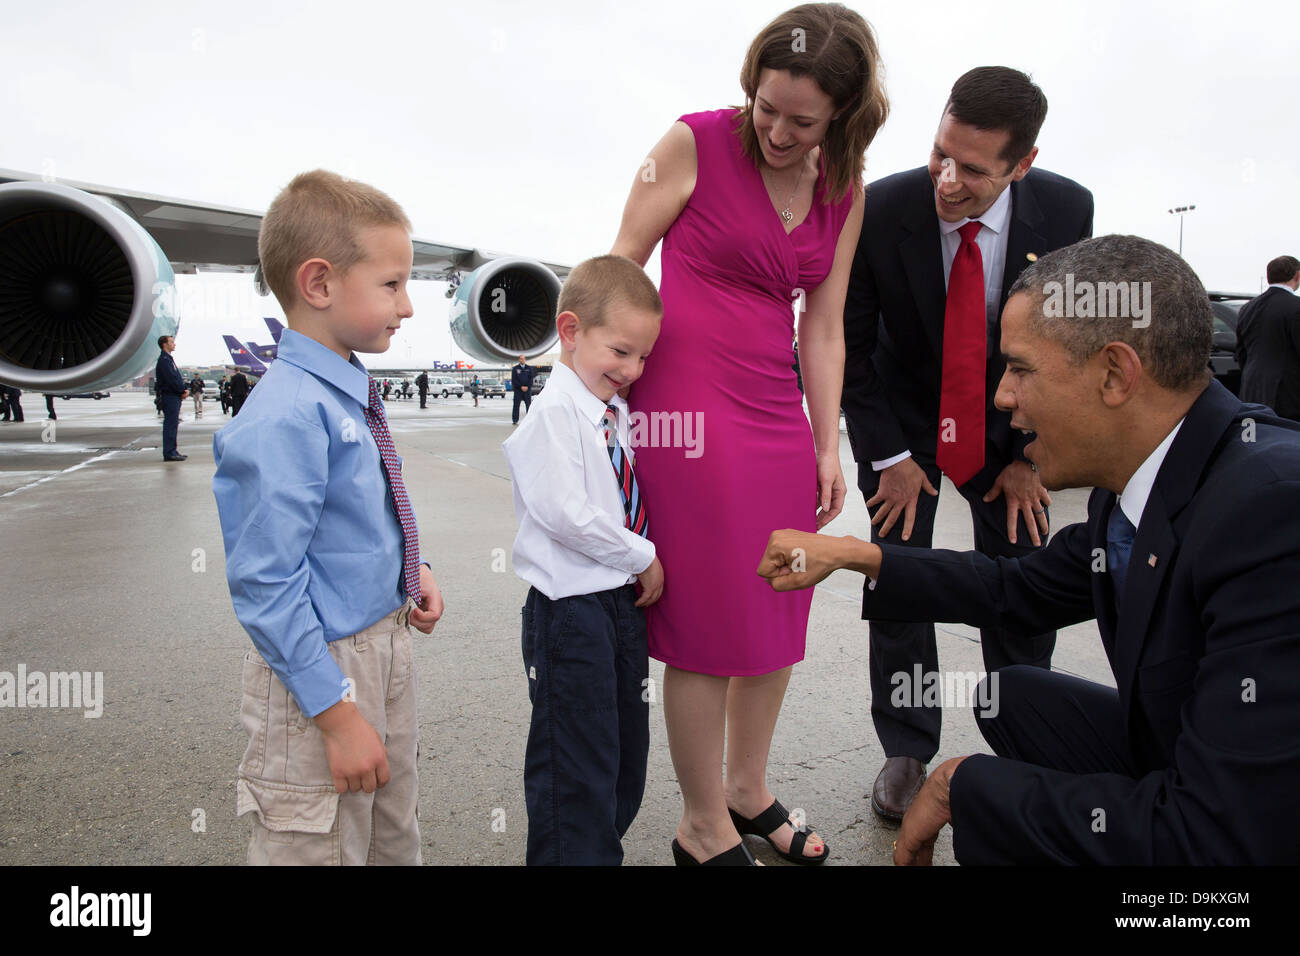 US President Barack Obama greets Jeff and Megan Guttman, along with their sons Ryan, left, and Jacob on the tarmac at Hartsfield-Jackson International Airport May 19, 2013 in Atlanta, GA. Stock Photo